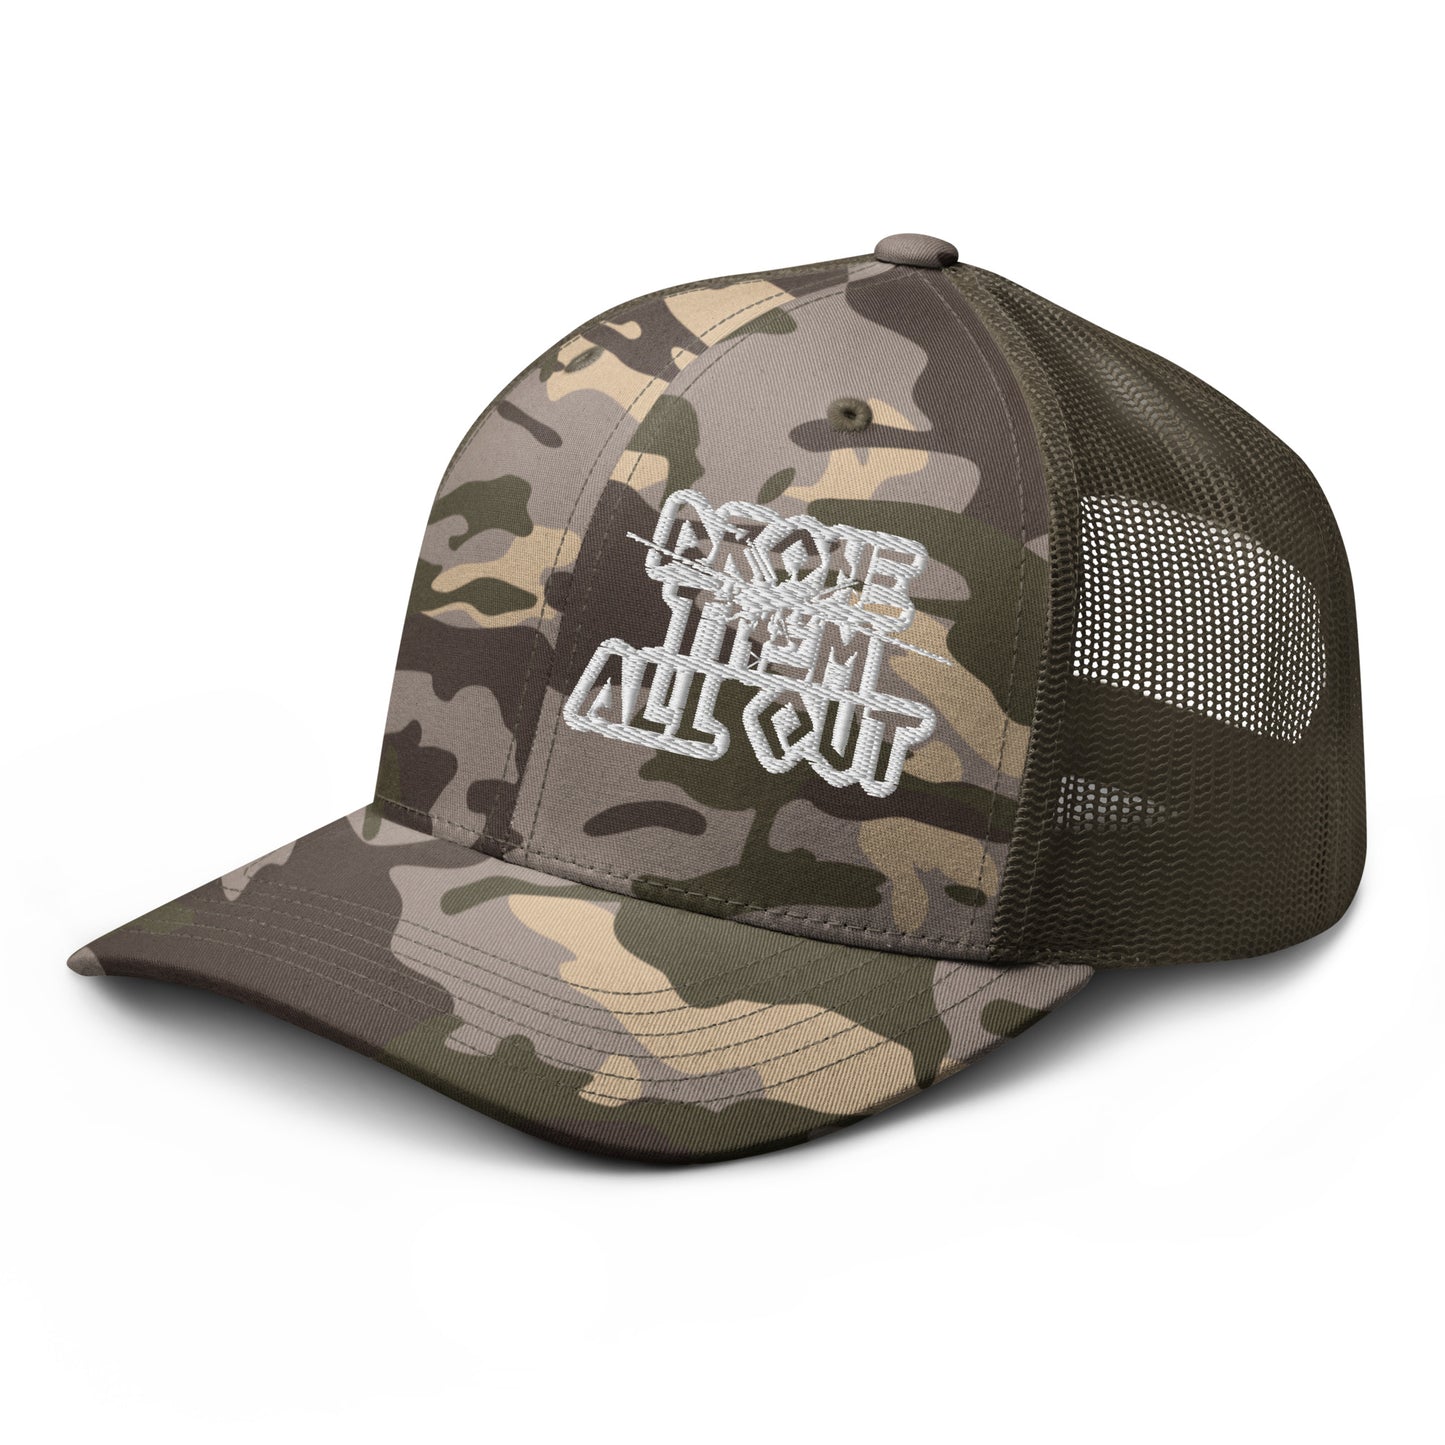 Drone Them Out- Reaper Camouflage trucker hat